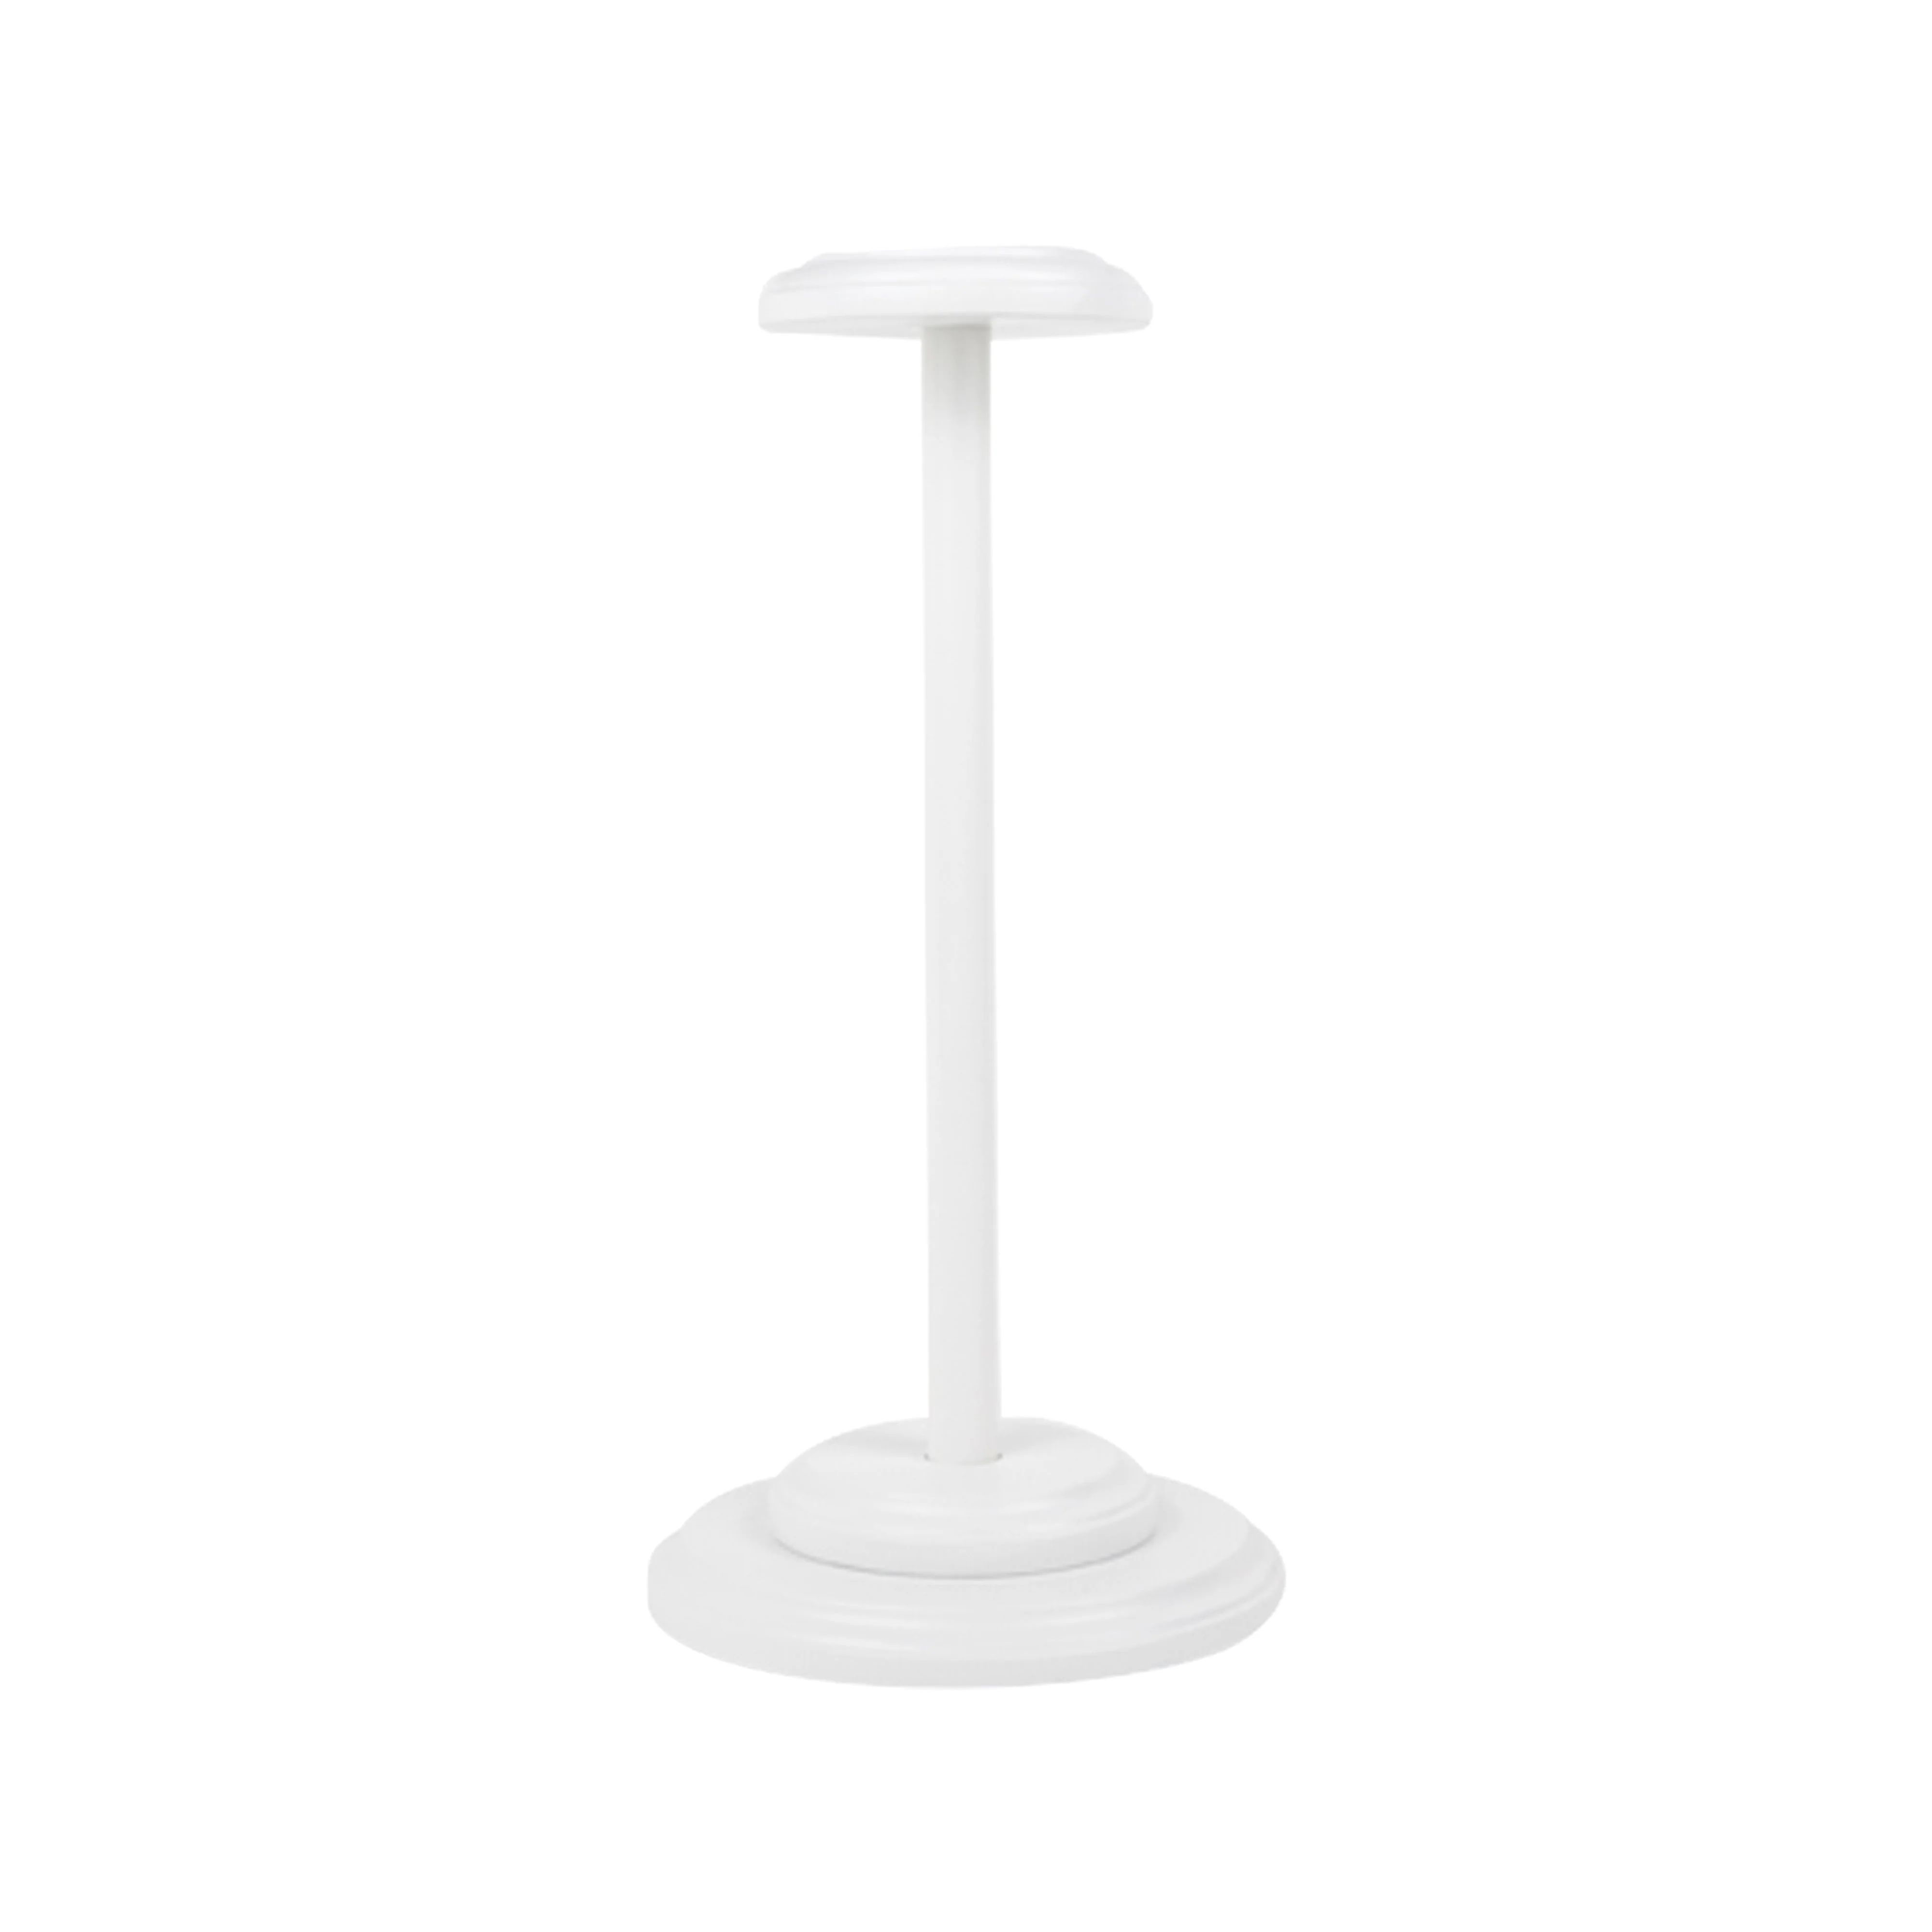 Wooden Hat Stand - White | The Beaufort Bonnet Company